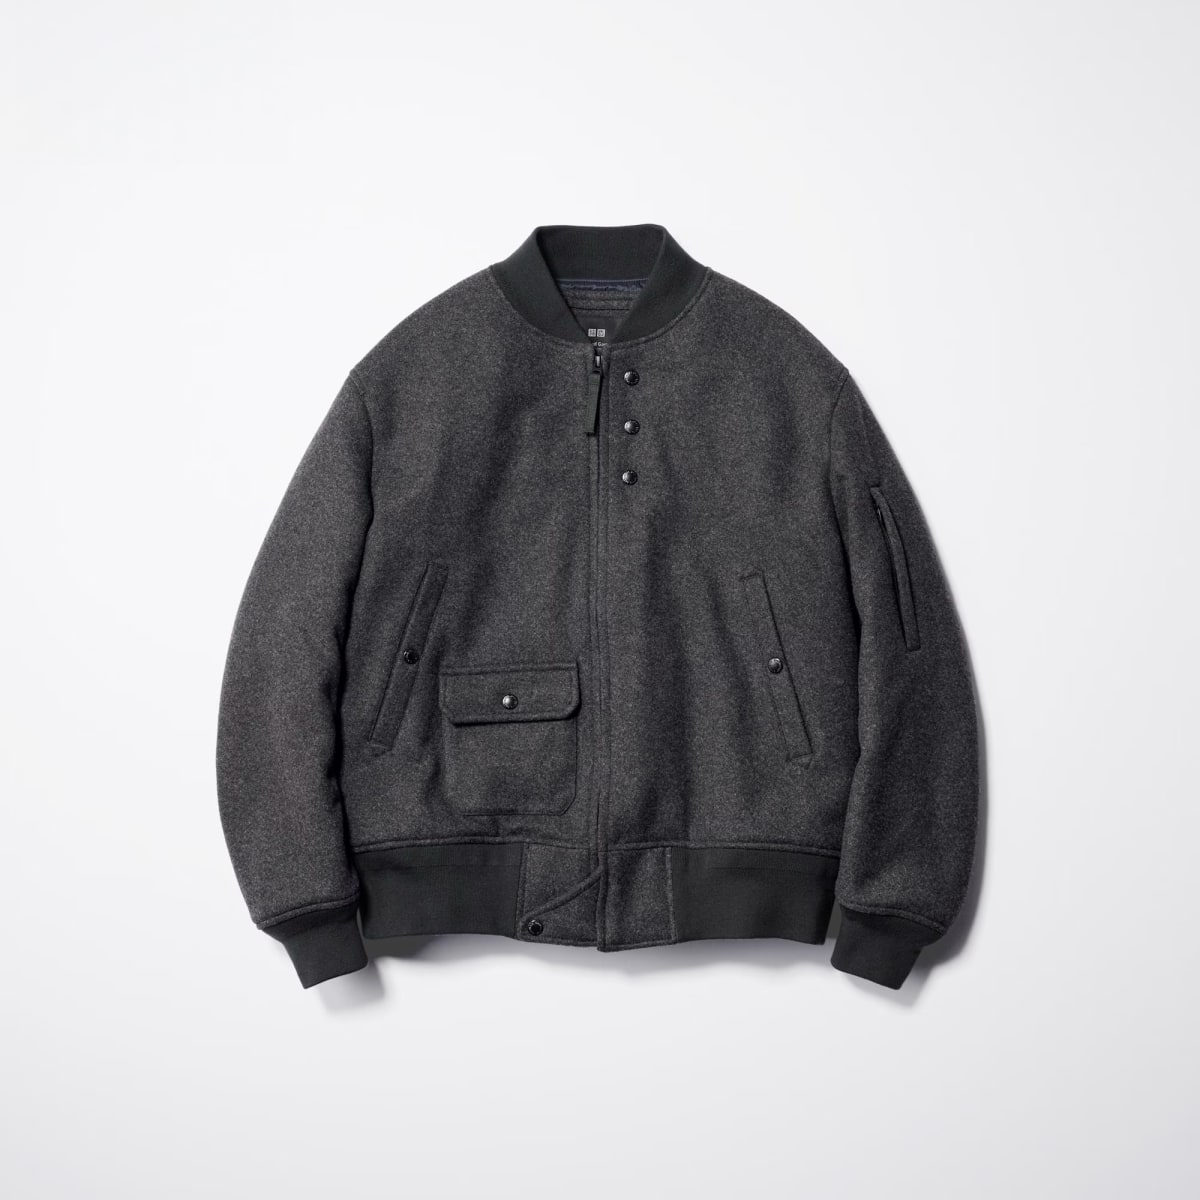 Uniqlo and Engineered Garments launch a collection of